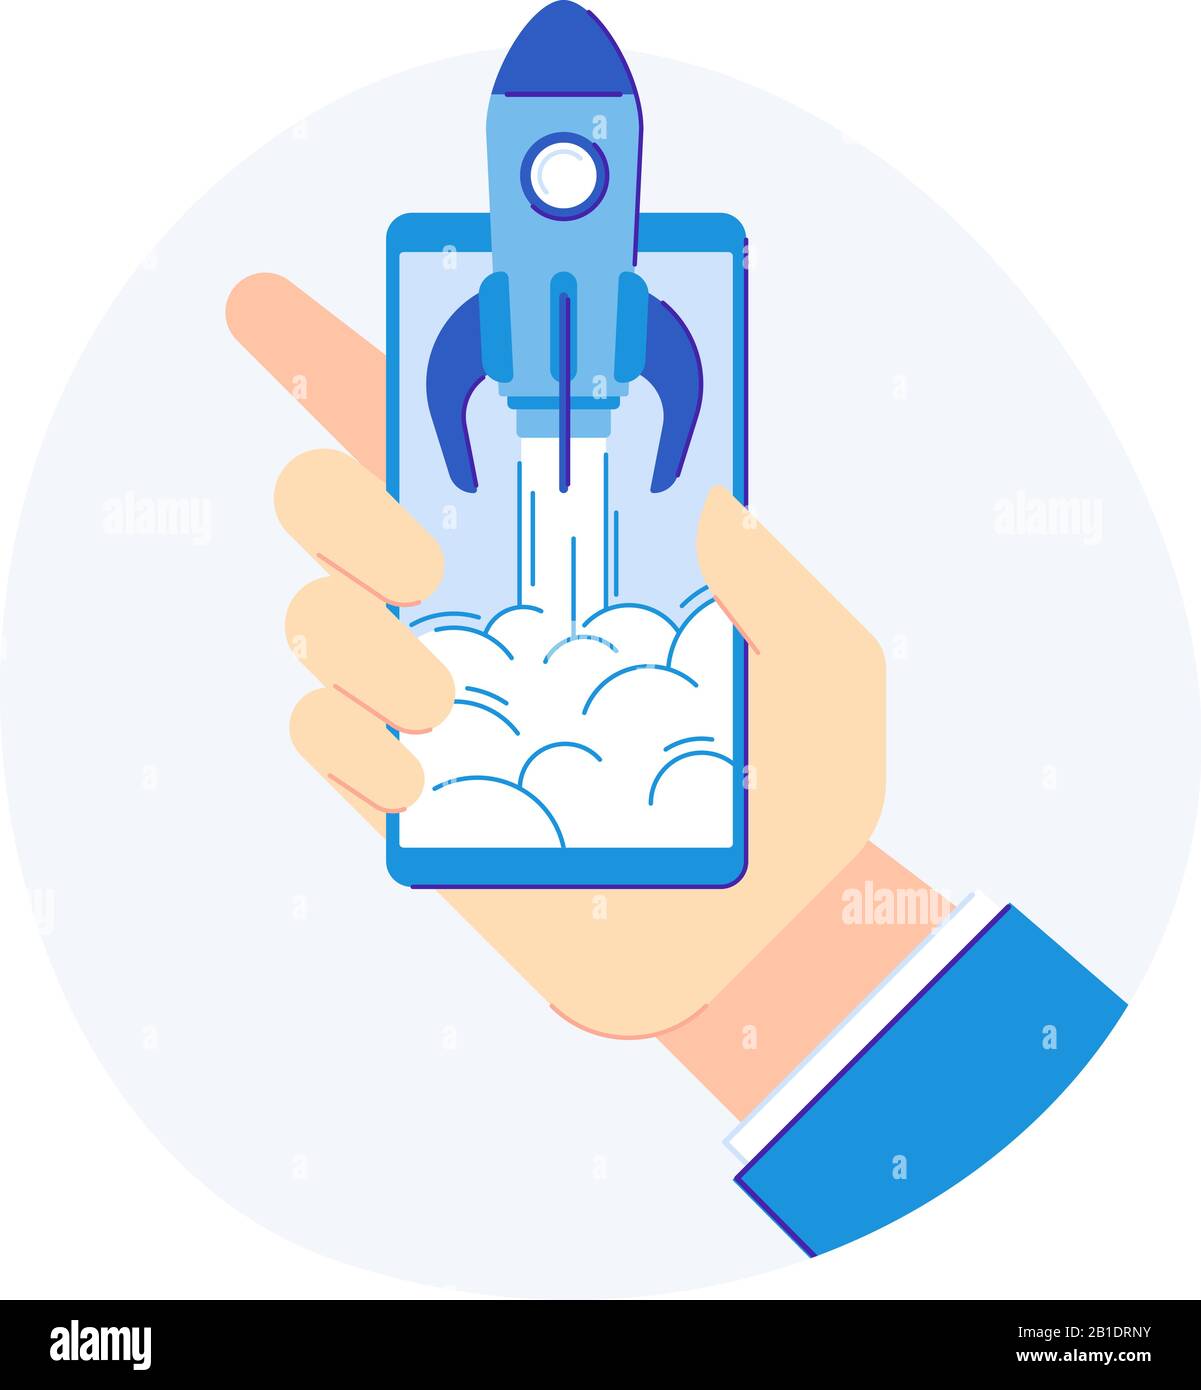 Phone startup concept. Cellphone rocketship for new product development release. Flat vector illustration Stock Vector